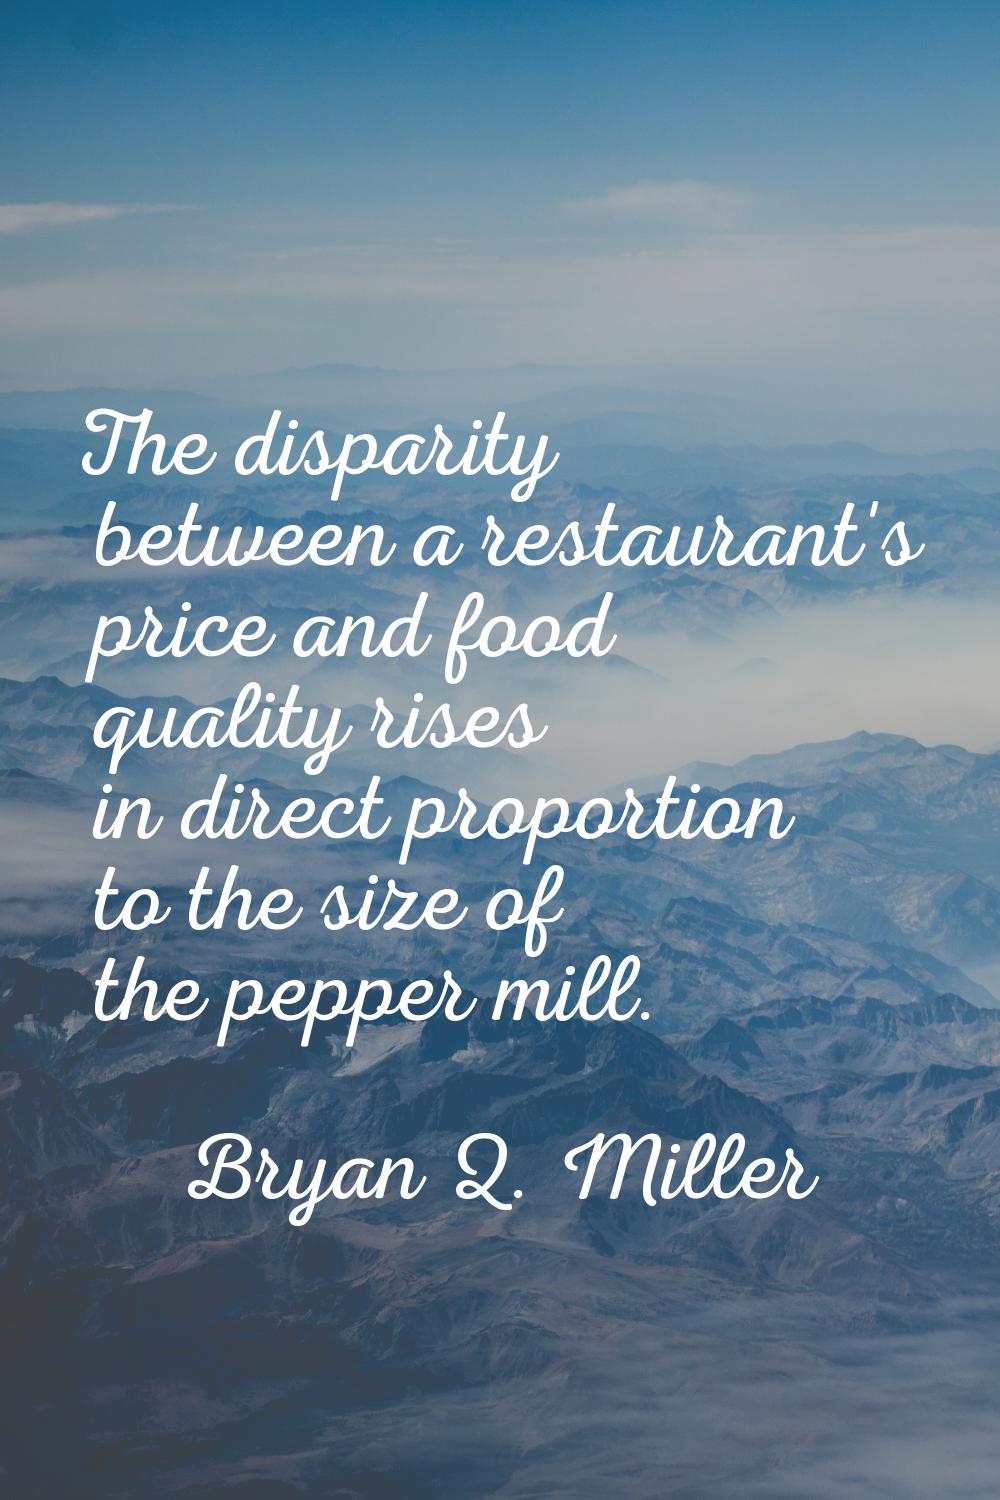 The disparity between a restaurant's price and food quality rises in direct proportion to the size 